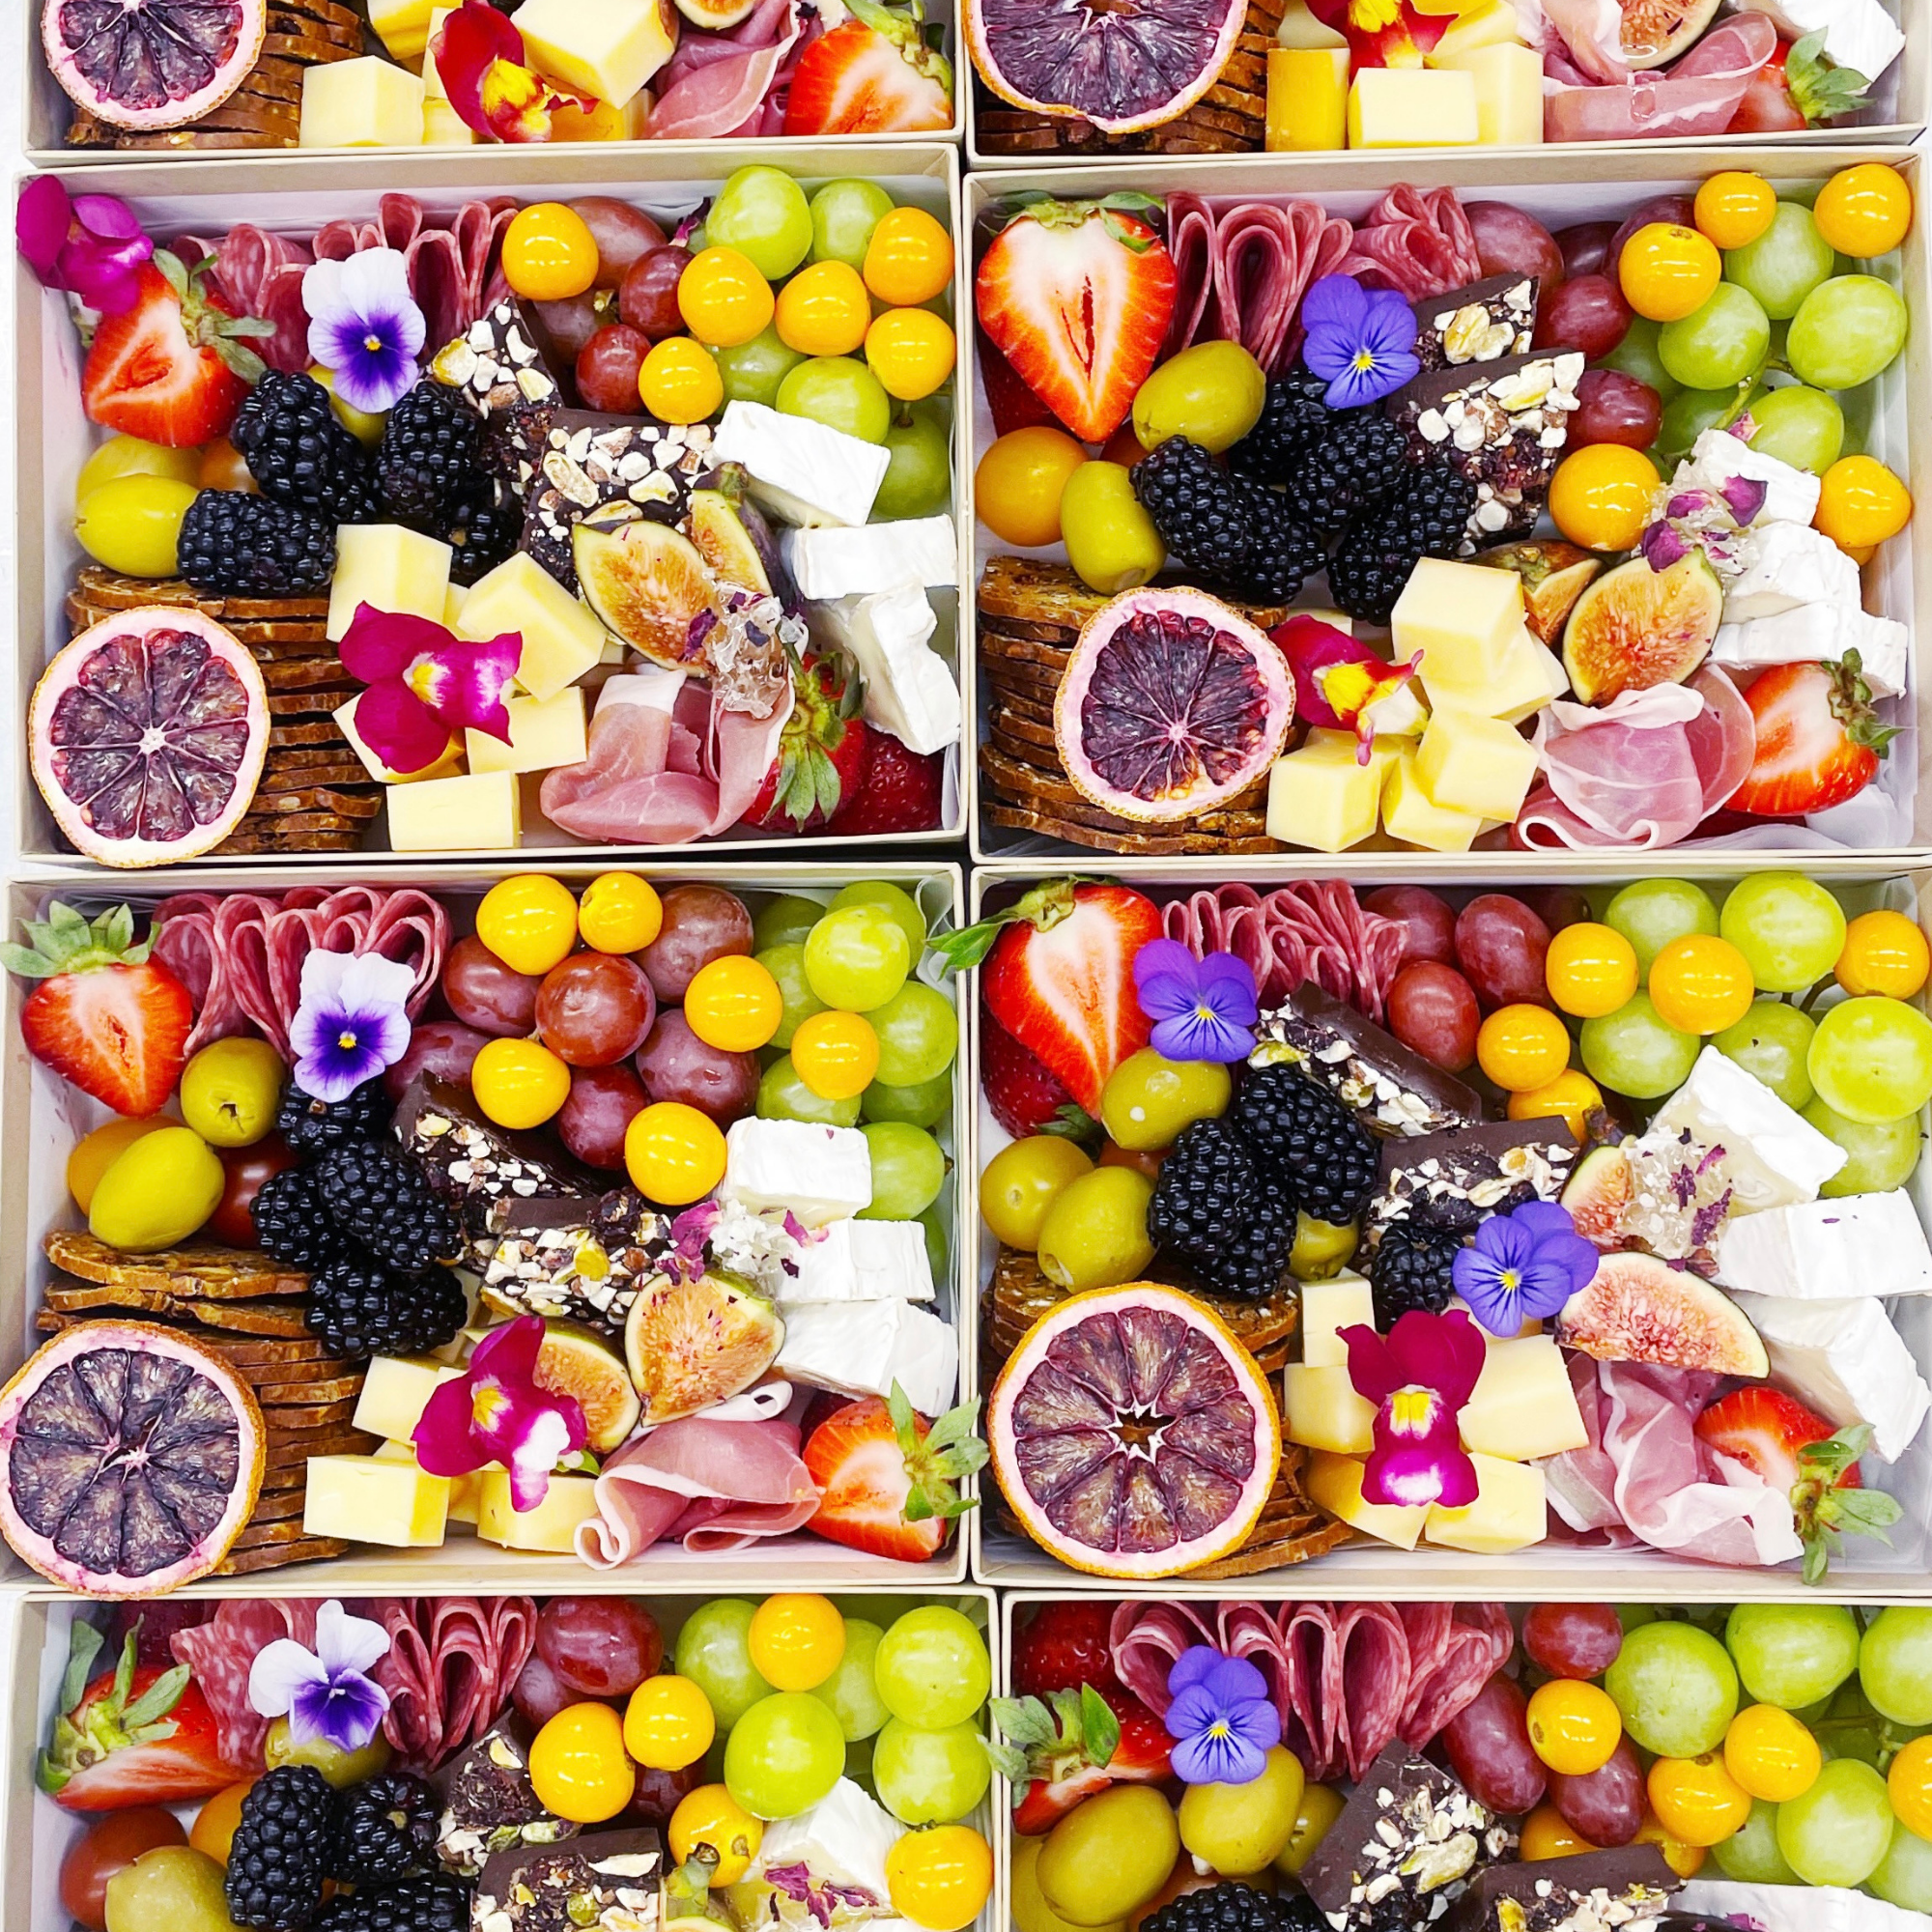 Individual Graze Box with Charcuterie, Cheeses, Fresh Fruits, Baguette, Edible Flowers. Regular, Gluten Free, Vegetarian, Dairy free and Gluten free available.